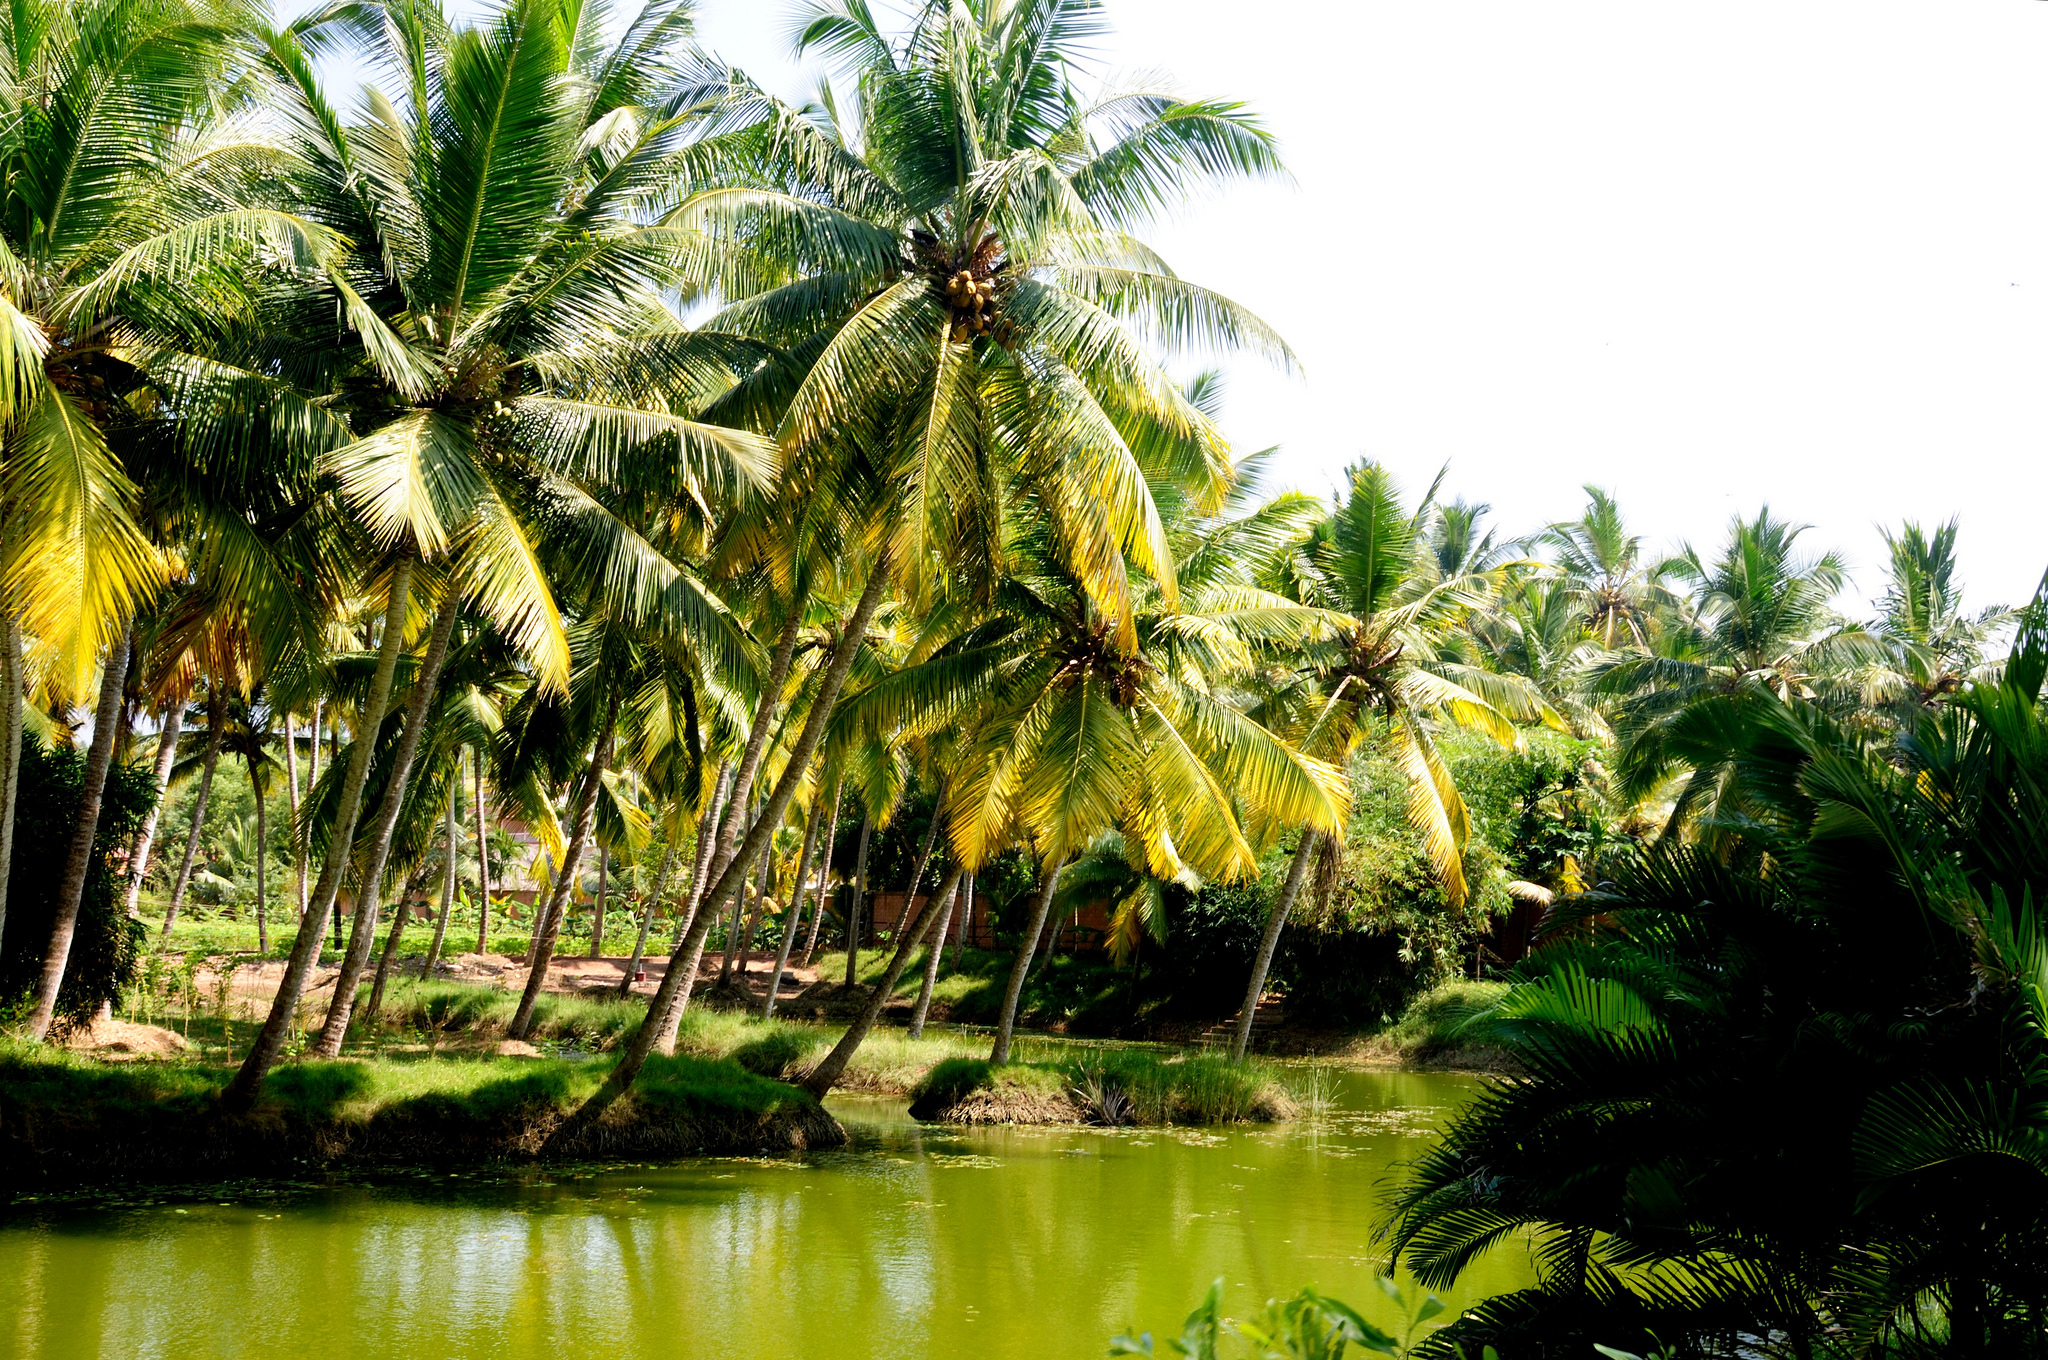 Kerala: Land of Coconut Trees - a scenic state in India known for its abundant coconut tree plantations.